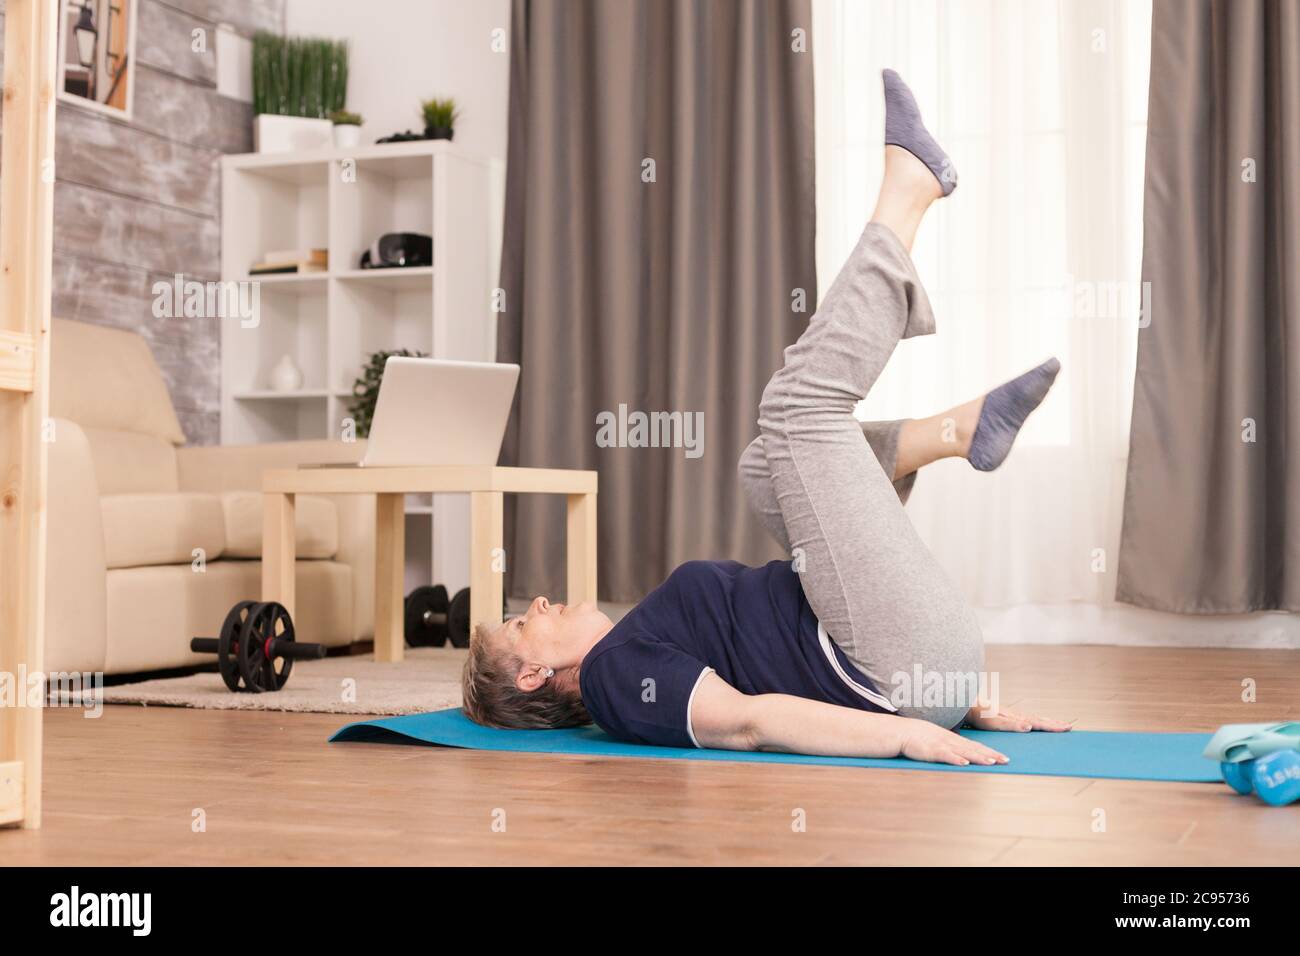 Old woman exercising in her apartment sitting on yoga mat. Old person  pensioner online internet exercise